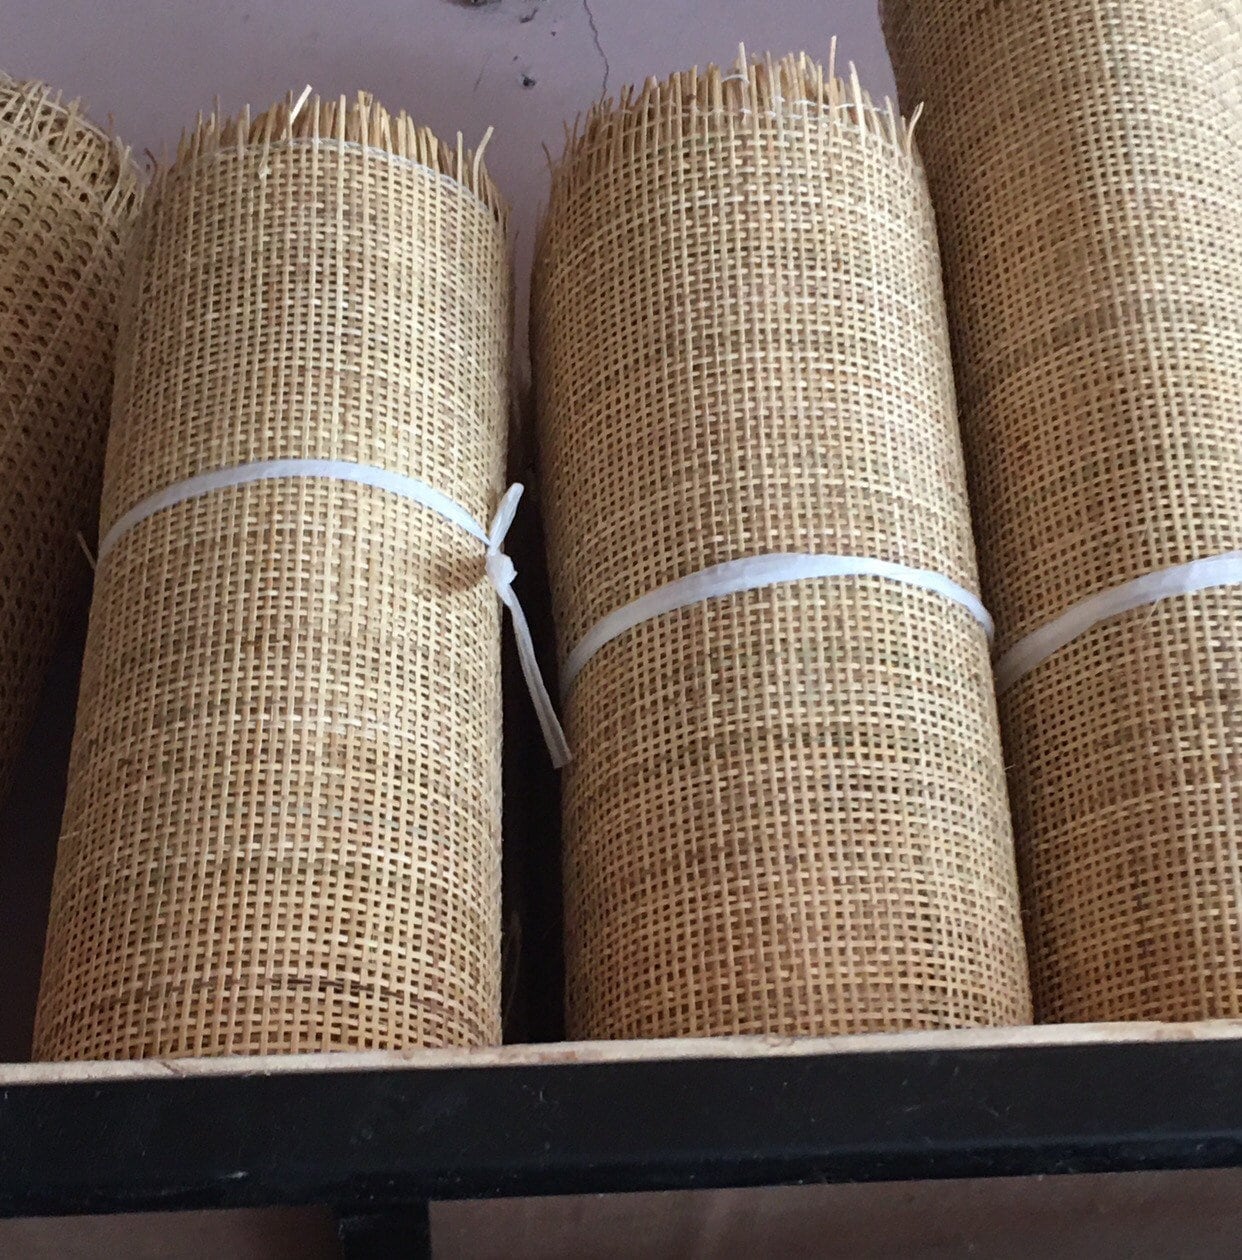 Natural Rattan Square Cane Webbing, Woven Rattan Mesh, Square Rattan Webbing,  Rattan Radio Weave Cane Webbing , Cane Rattan Webbing, 